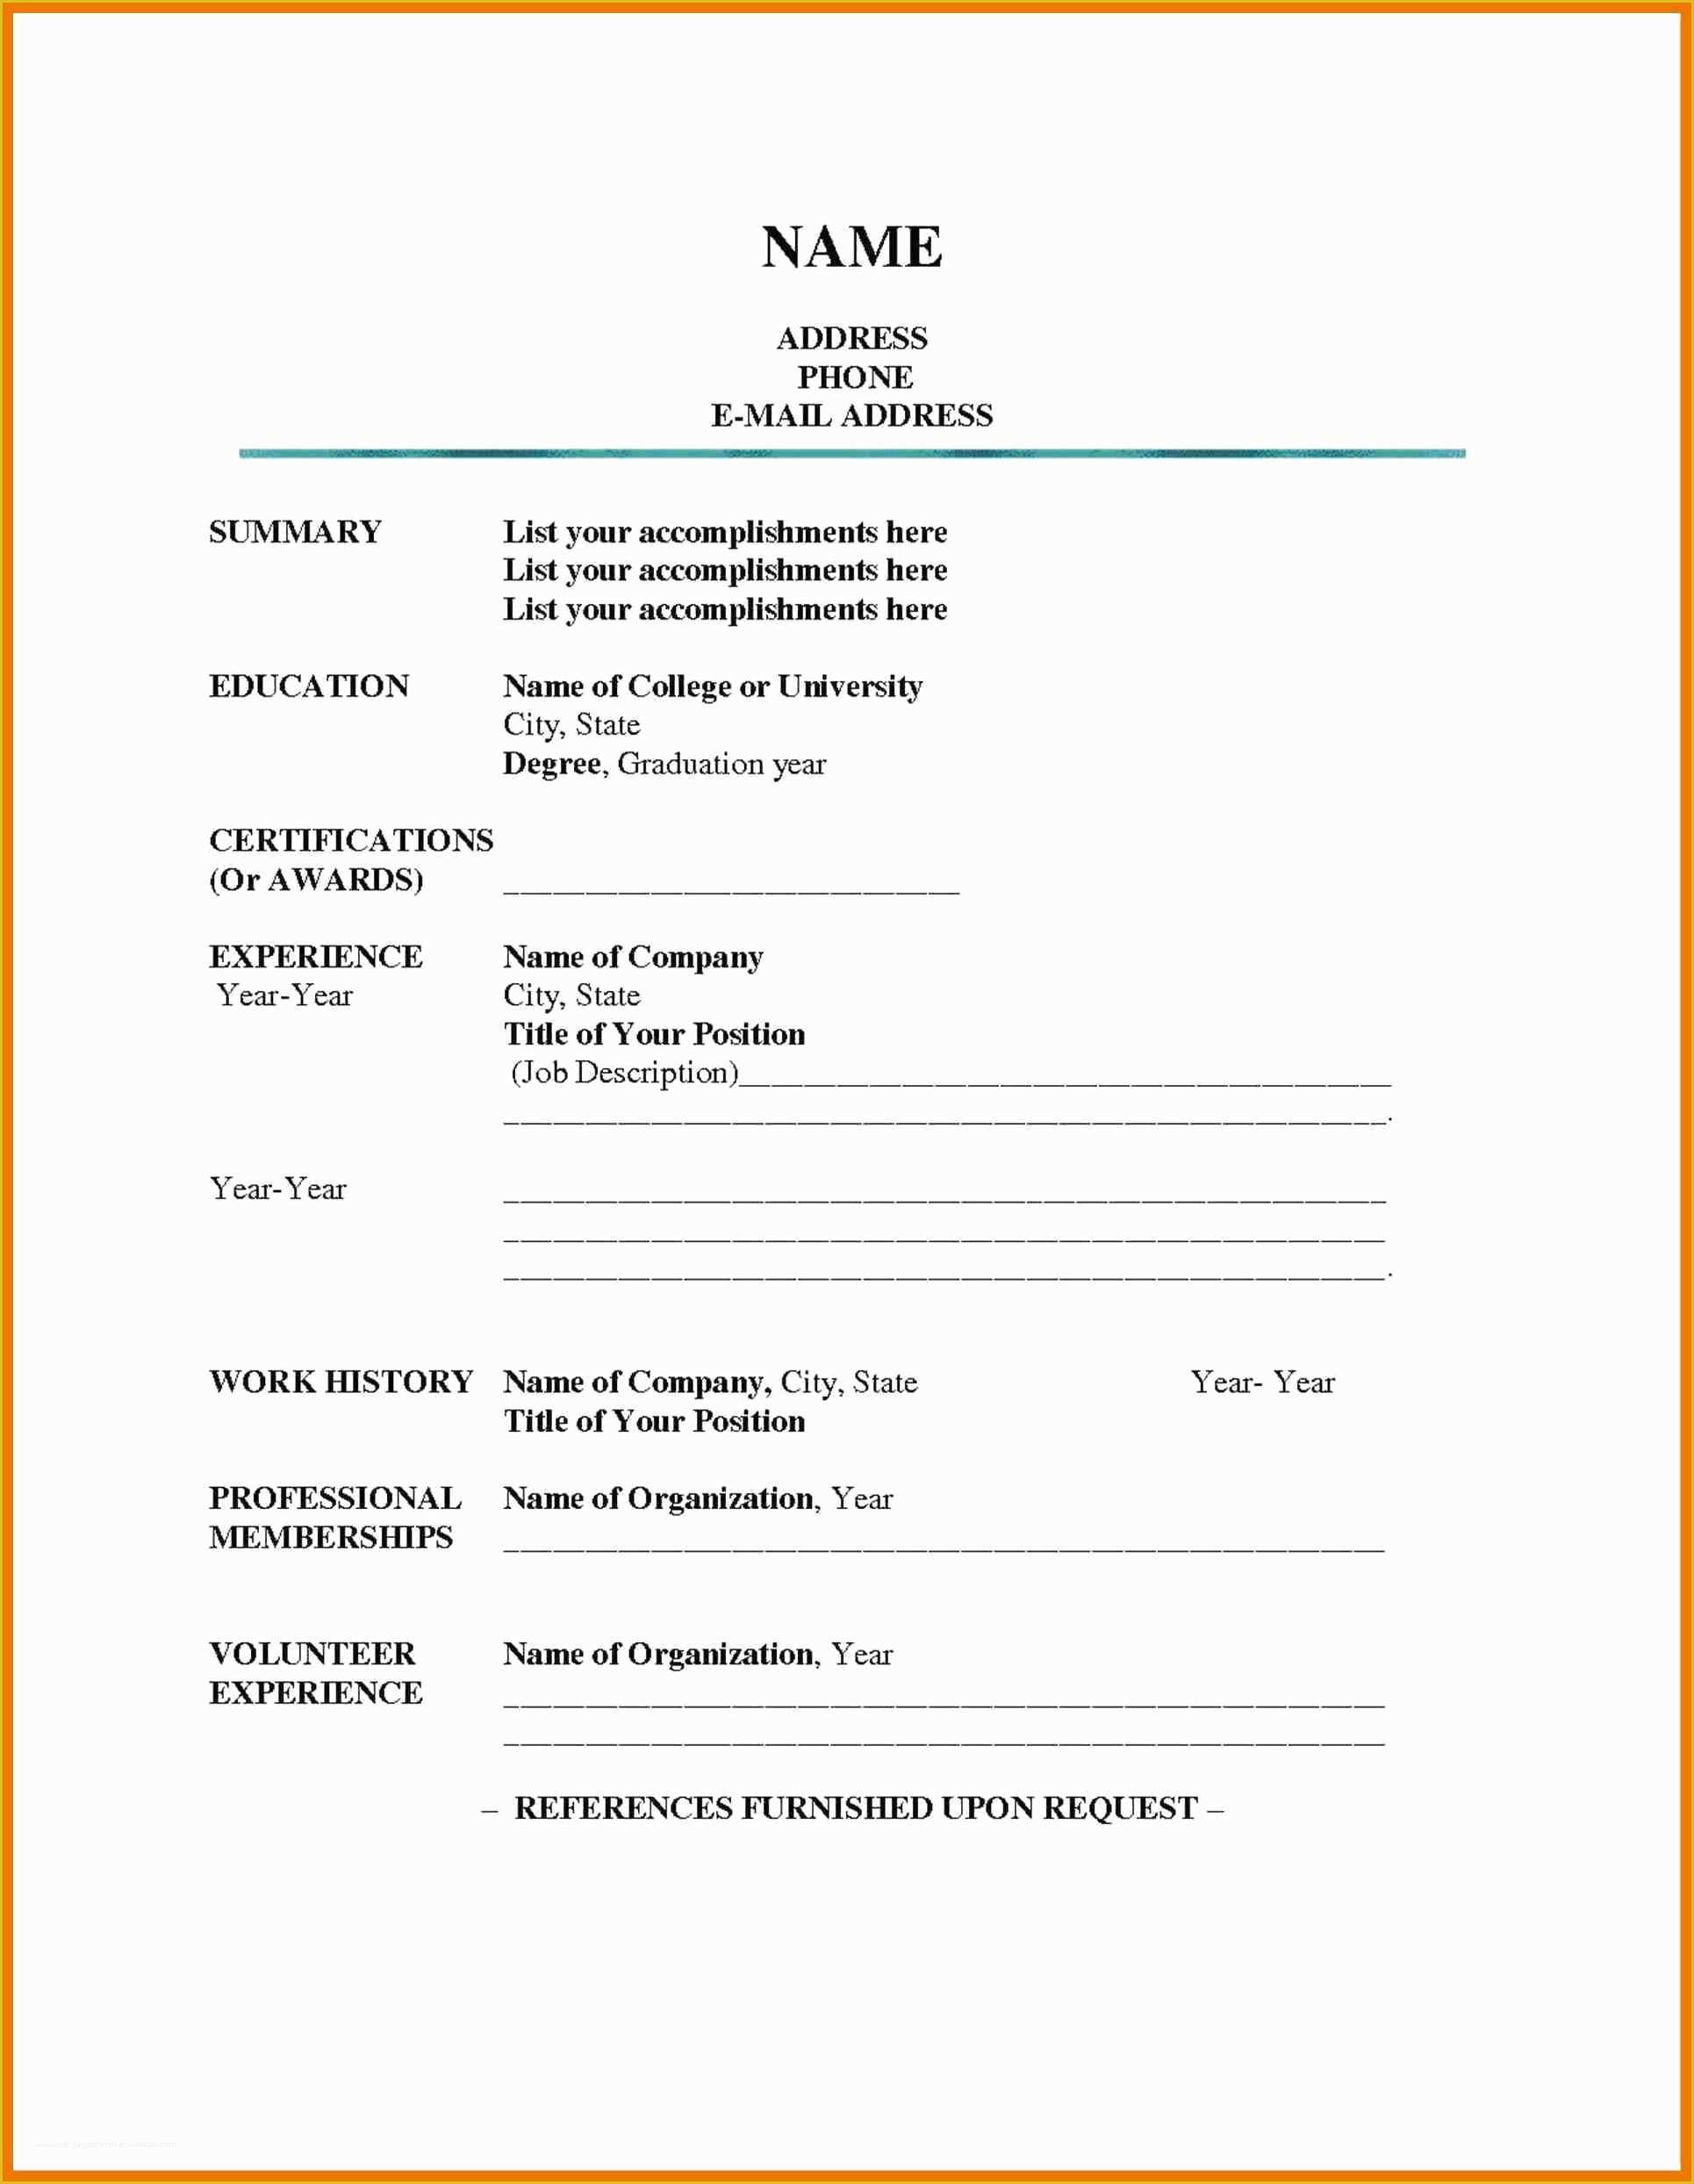 Free Printable Fill In the Blank Resume Templates Of forms Resume